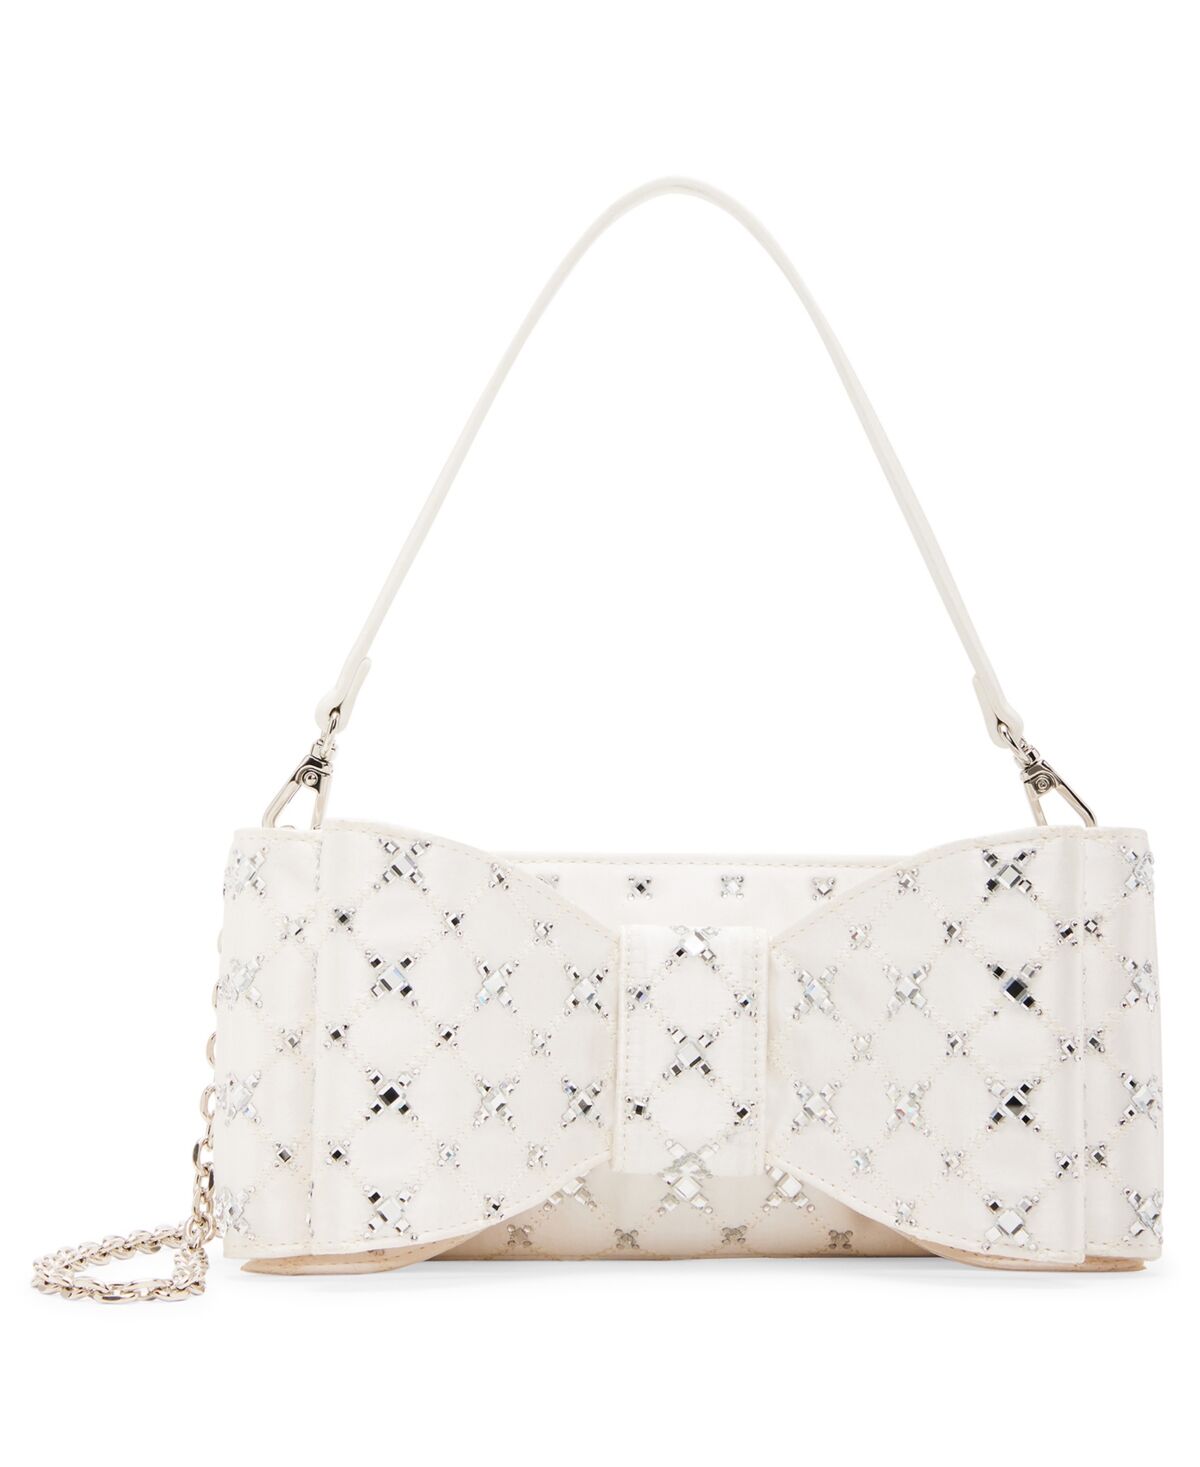 Betsey Johnson Tie The Knot Bag - Ivory